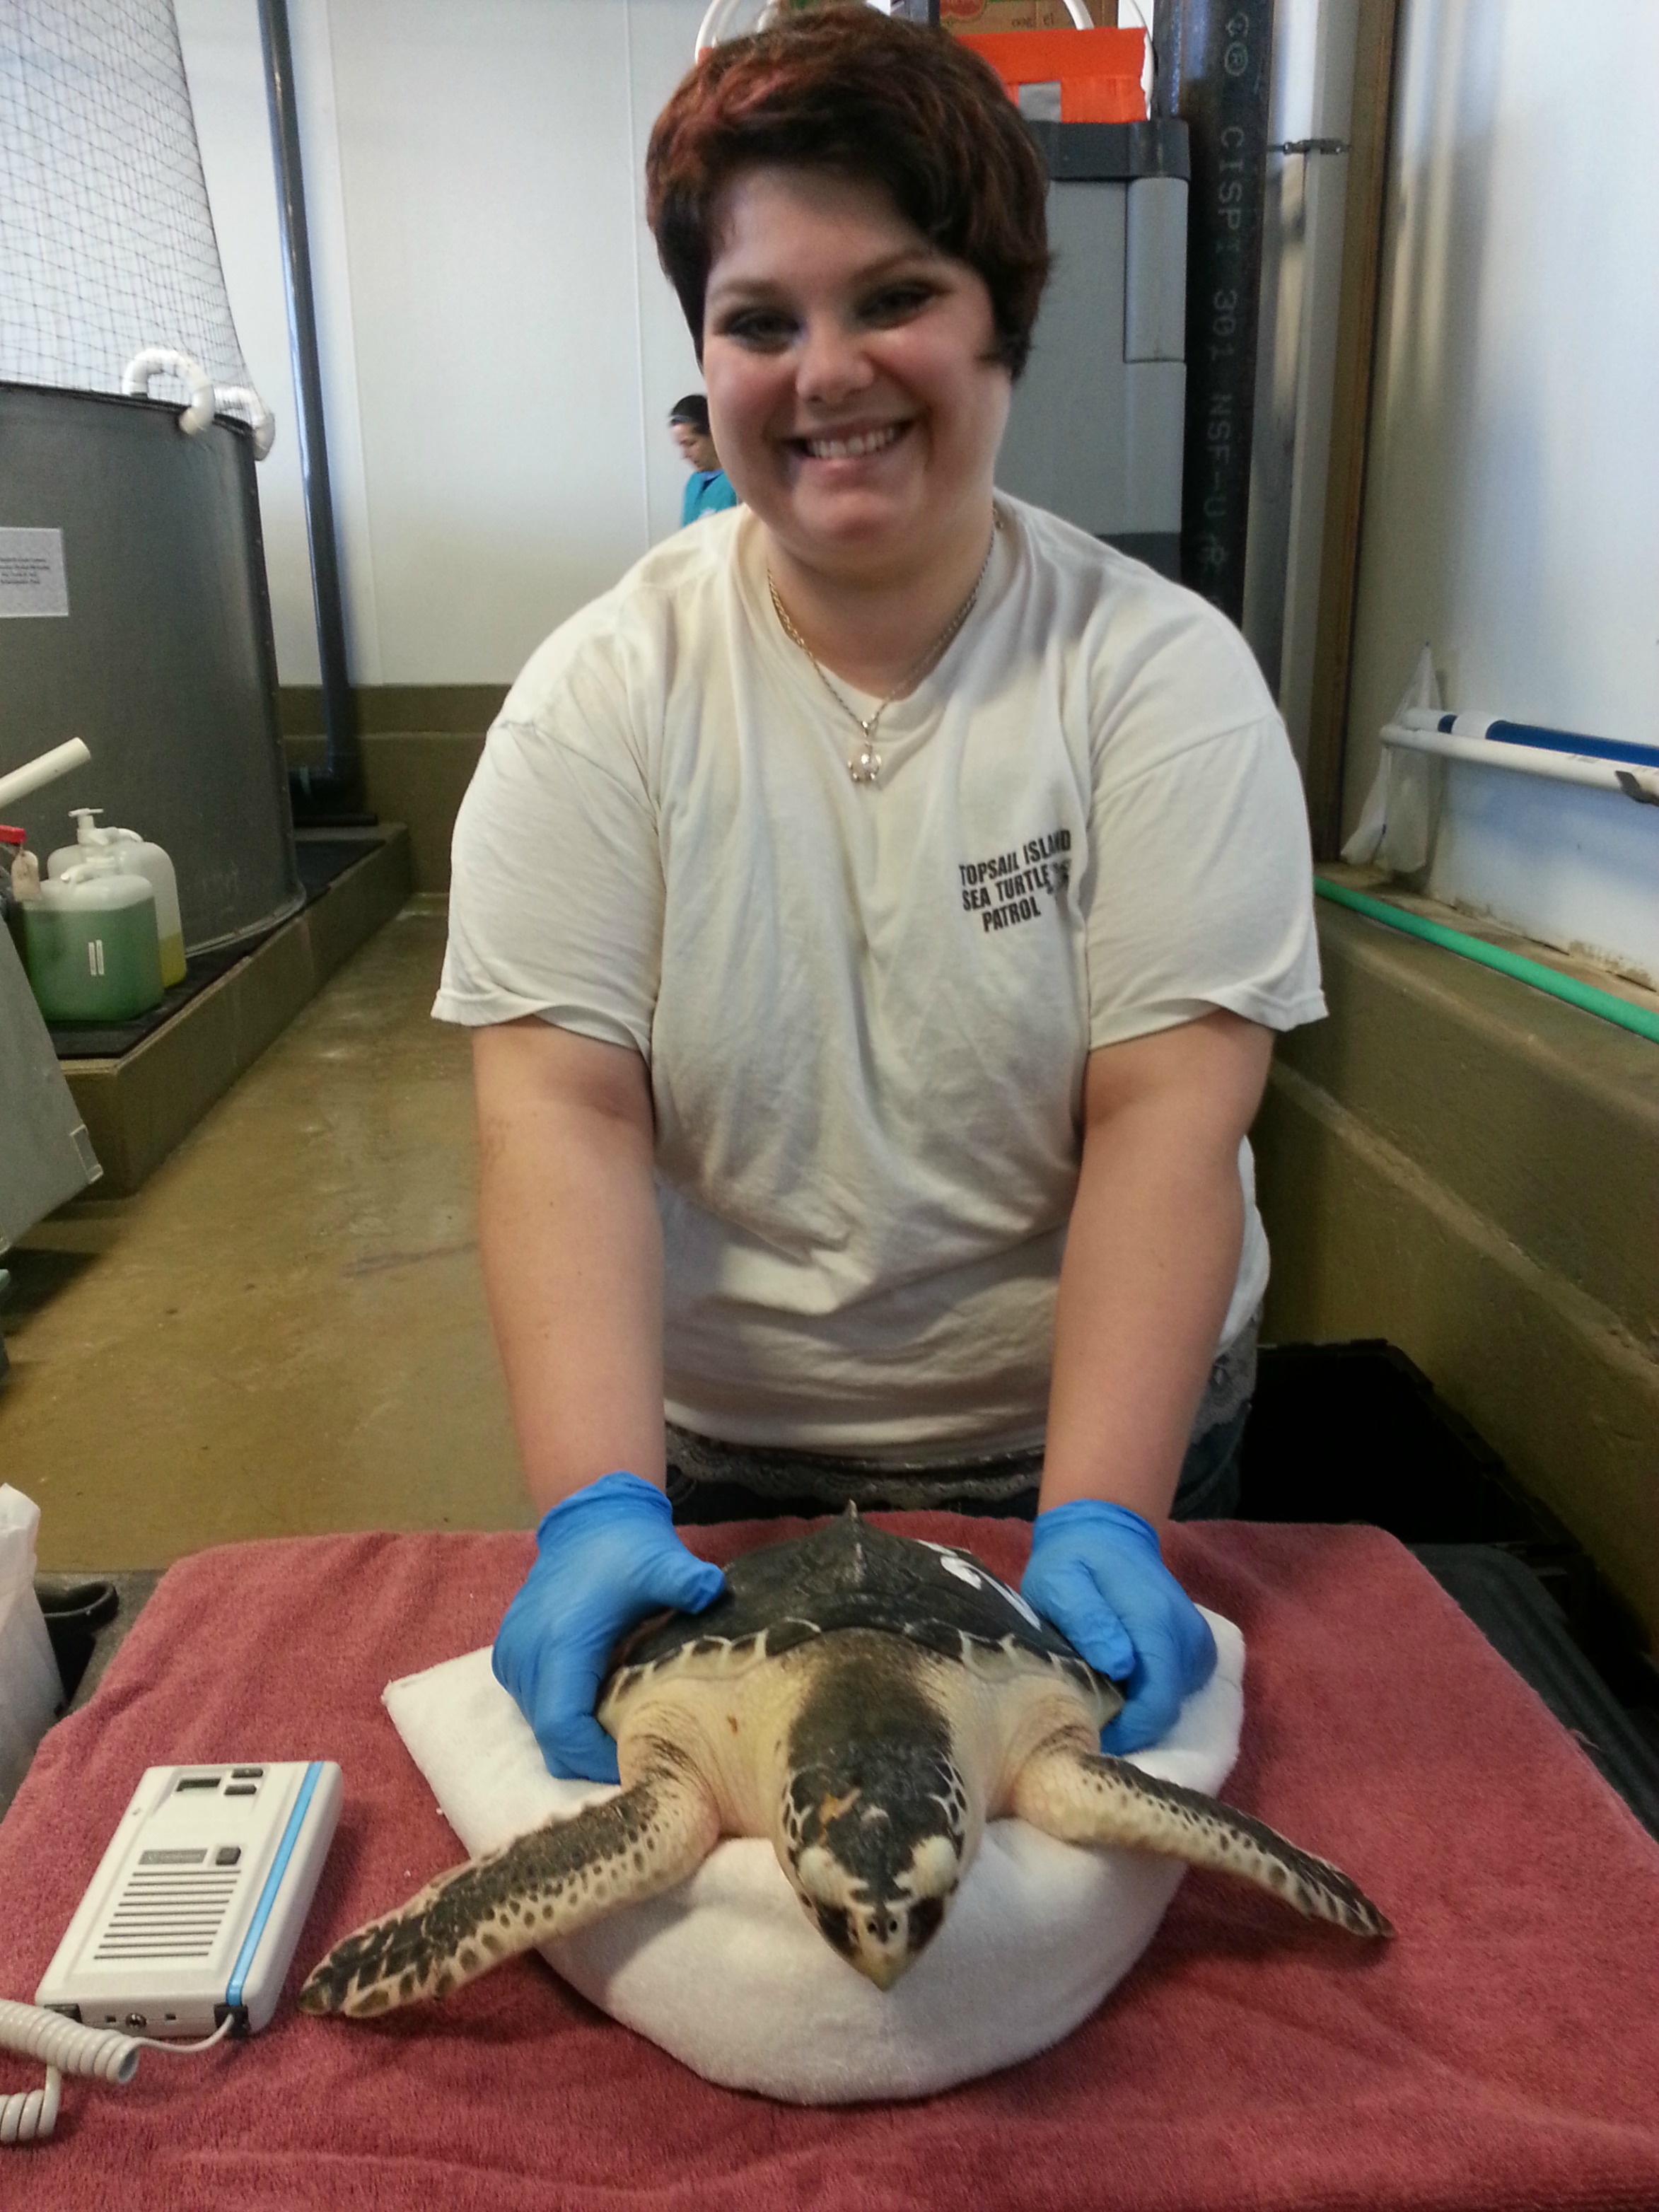 Brie Myre holding a Kemp's Ridley sea turtle at the National Marine Life Center during a veterinary examination.